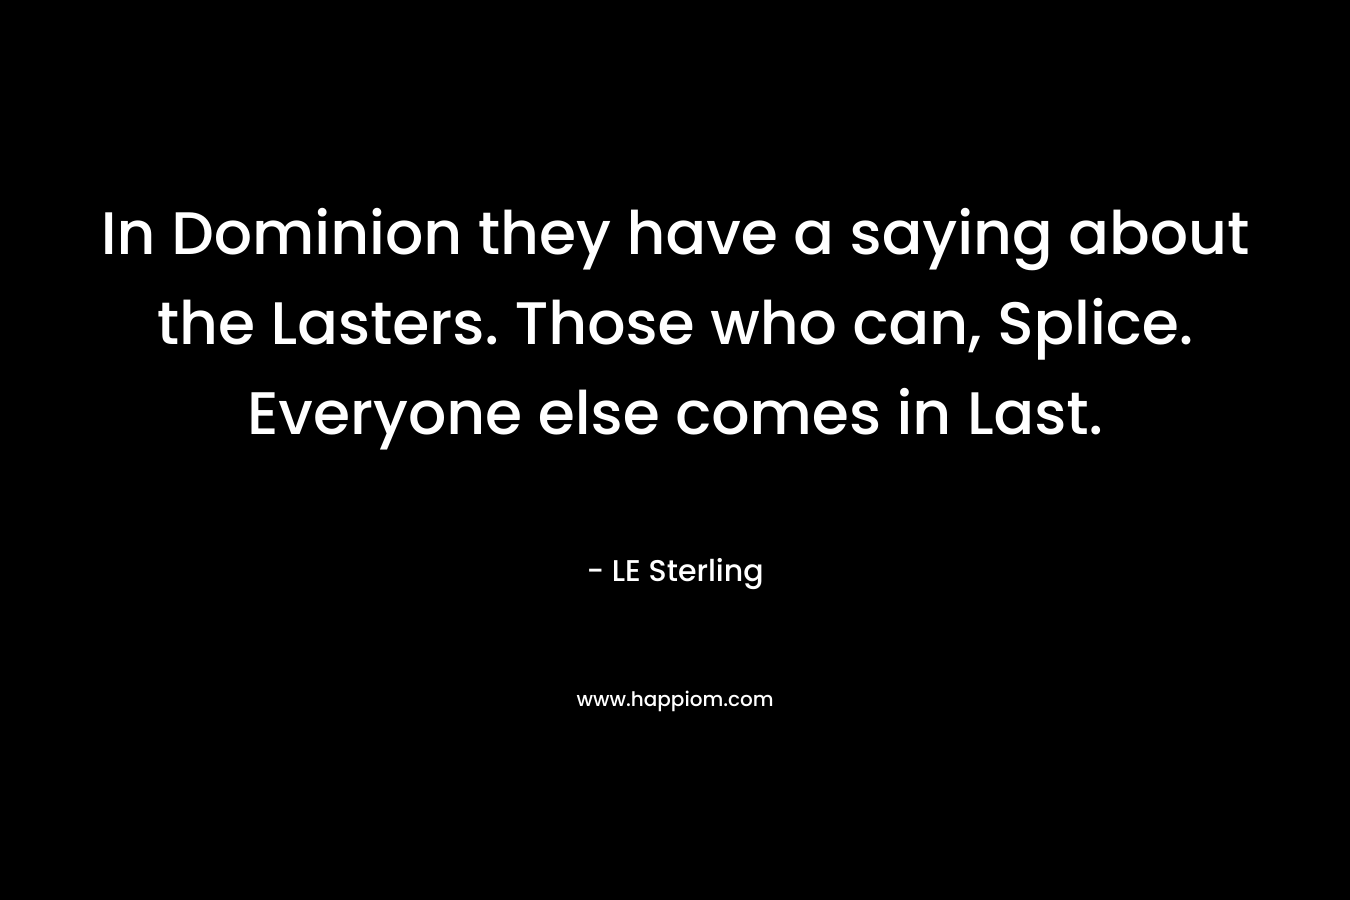 In Dominion they have a saying about the Lasters. Those who can, Splice. Everyone else comes in Last.